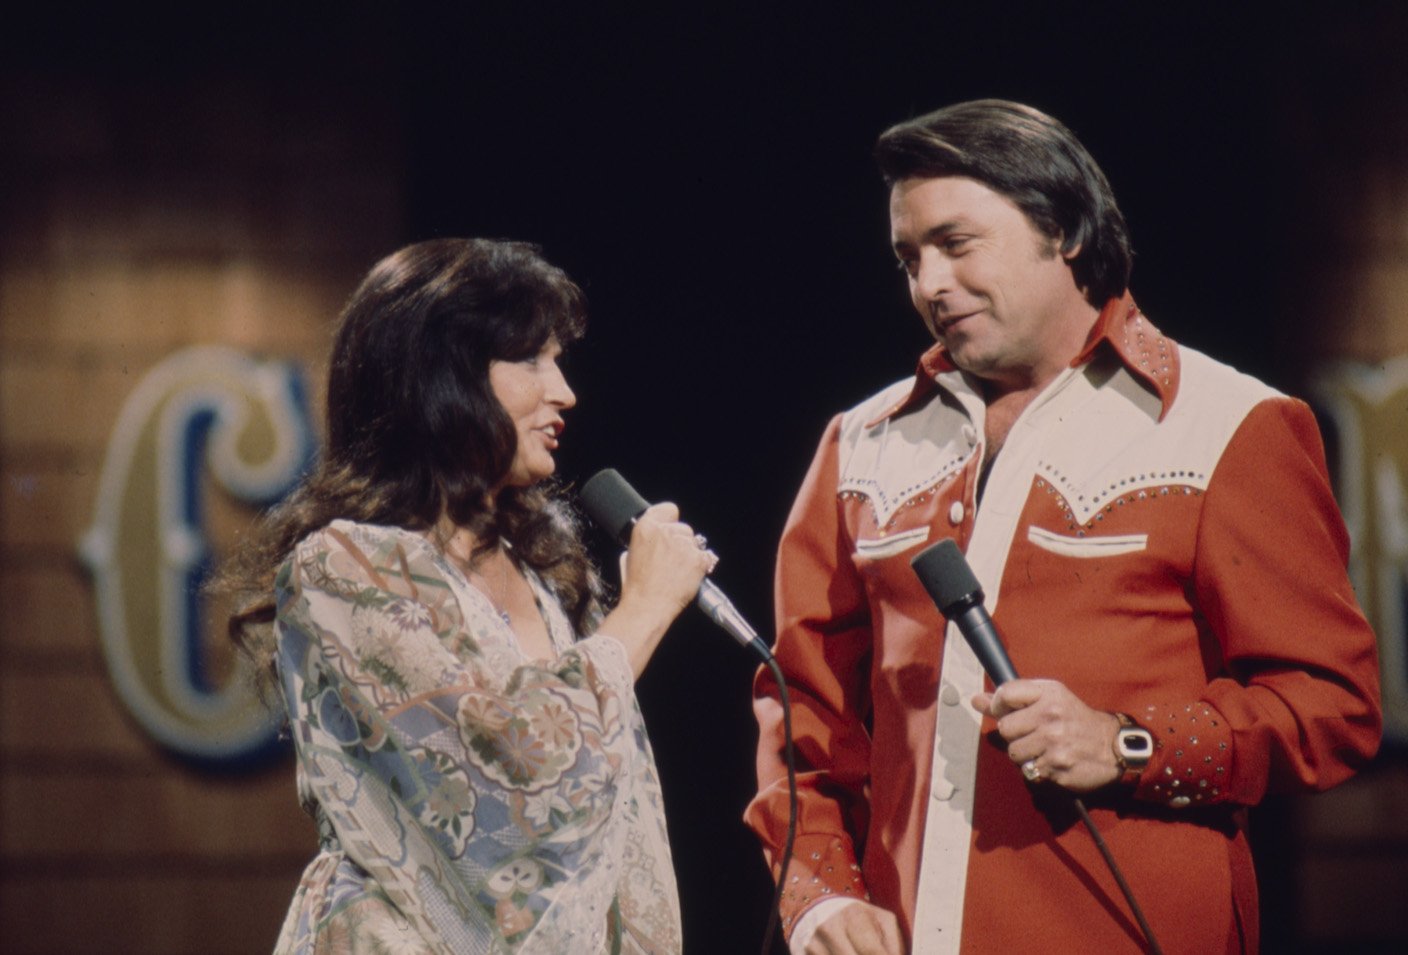 Loretta Lynn and Mickey Gilley singing together on stage